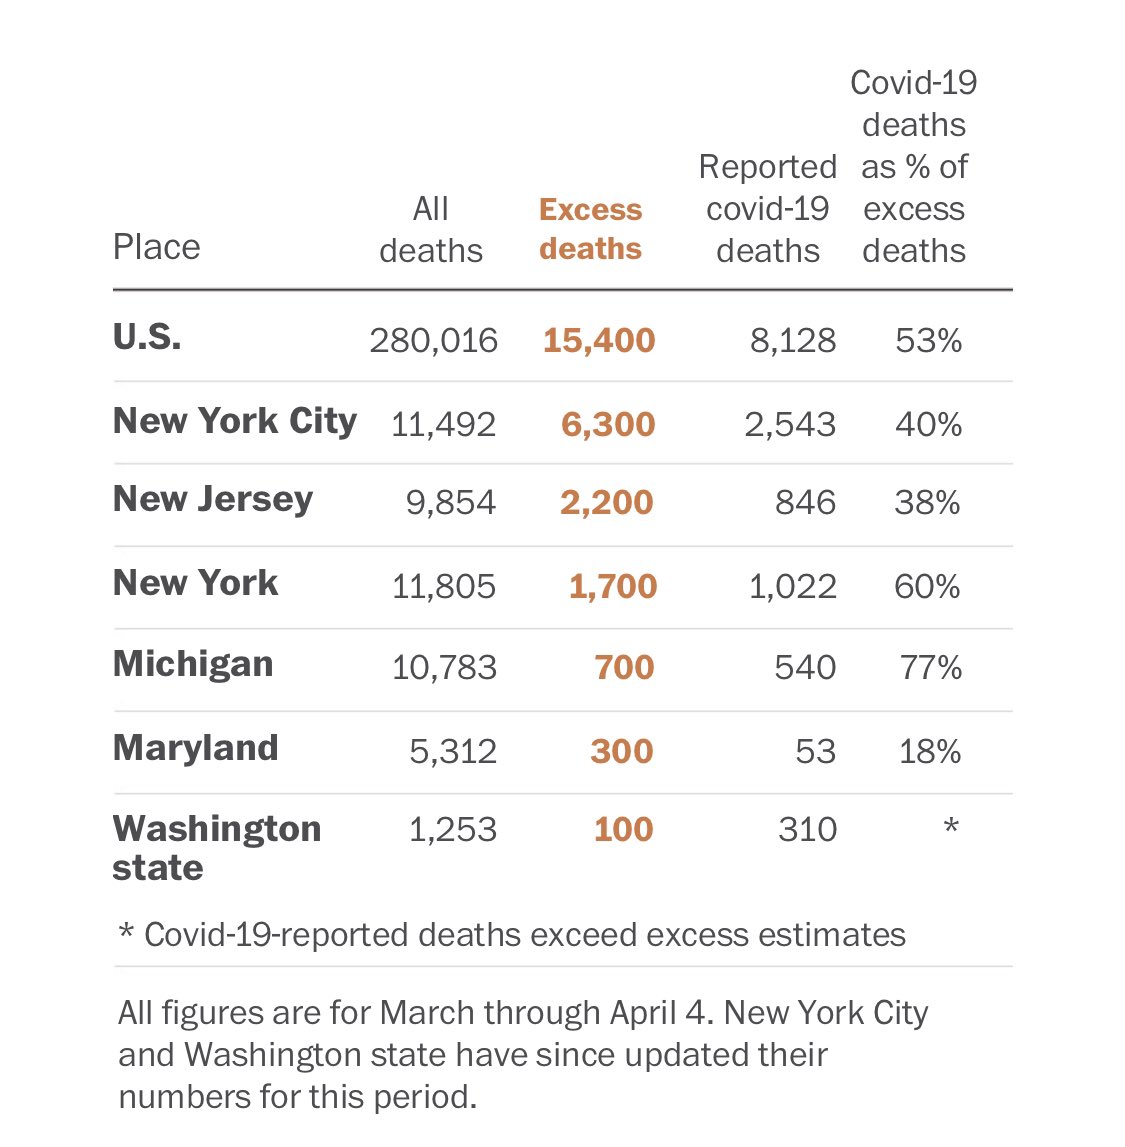 Elected officials need ACCURATE data about the *actual* number of  #COVID19 cases and deaths to make informed decisions about reopening. In the absence of adequate  #coronavirus testing, the number of “excess deaths” is an important metric that should be closely watched.